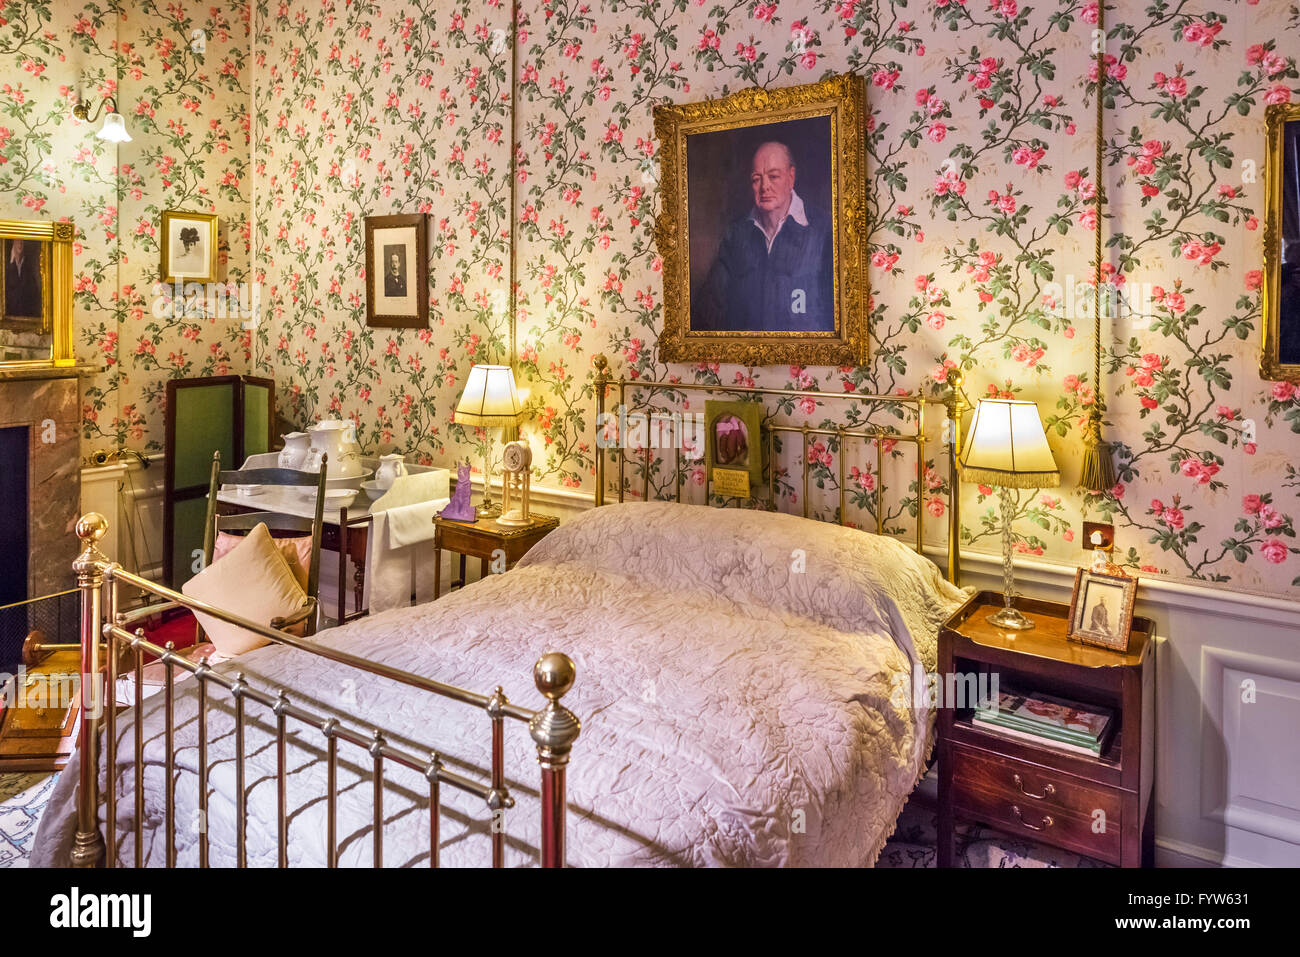 Bedroom in which Sir Winston Churchill was born, Blenheim Palace, seat of the Dukes of Marlborough, Woodstock, Oxfordshire, UK Stock Photo